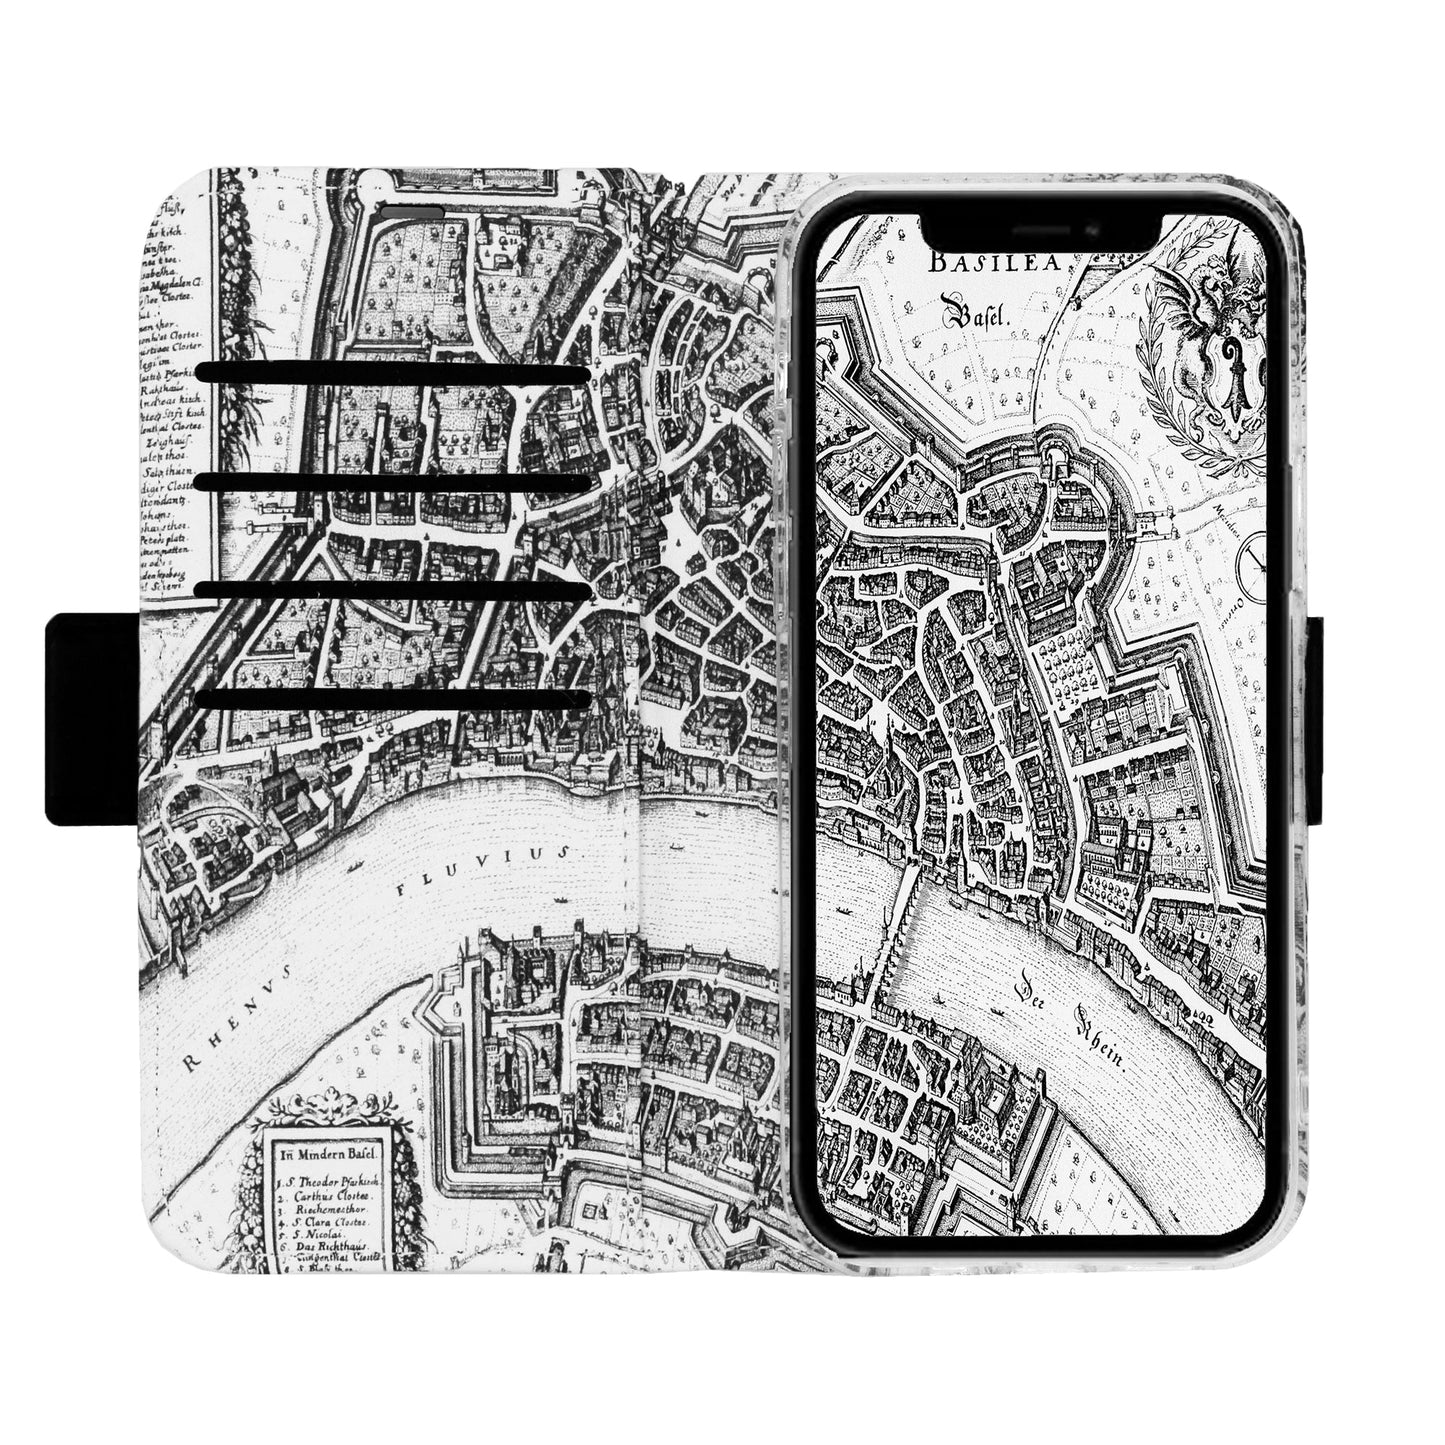 Basel City Spalentor Victor Case for iPhone 11 Pro Max